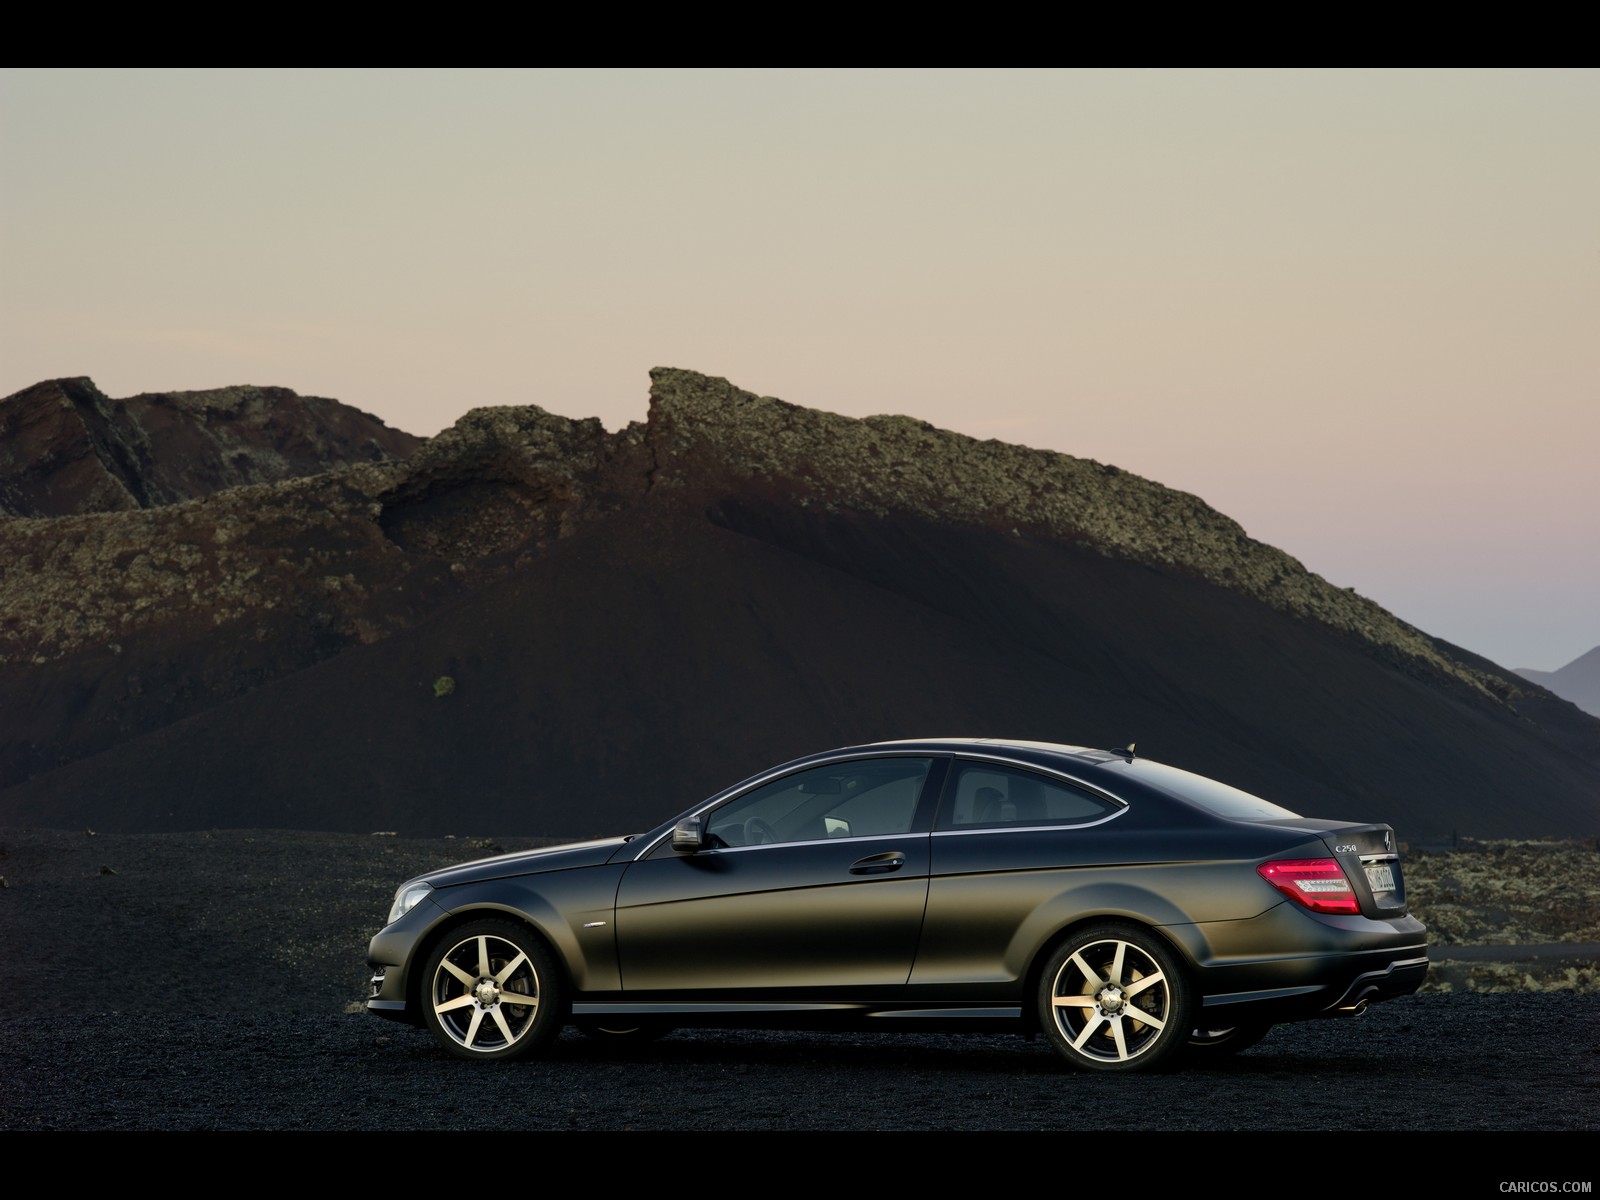 Mercedes-Benz C-Class Coupe (2012)  - Side, #13 of 79